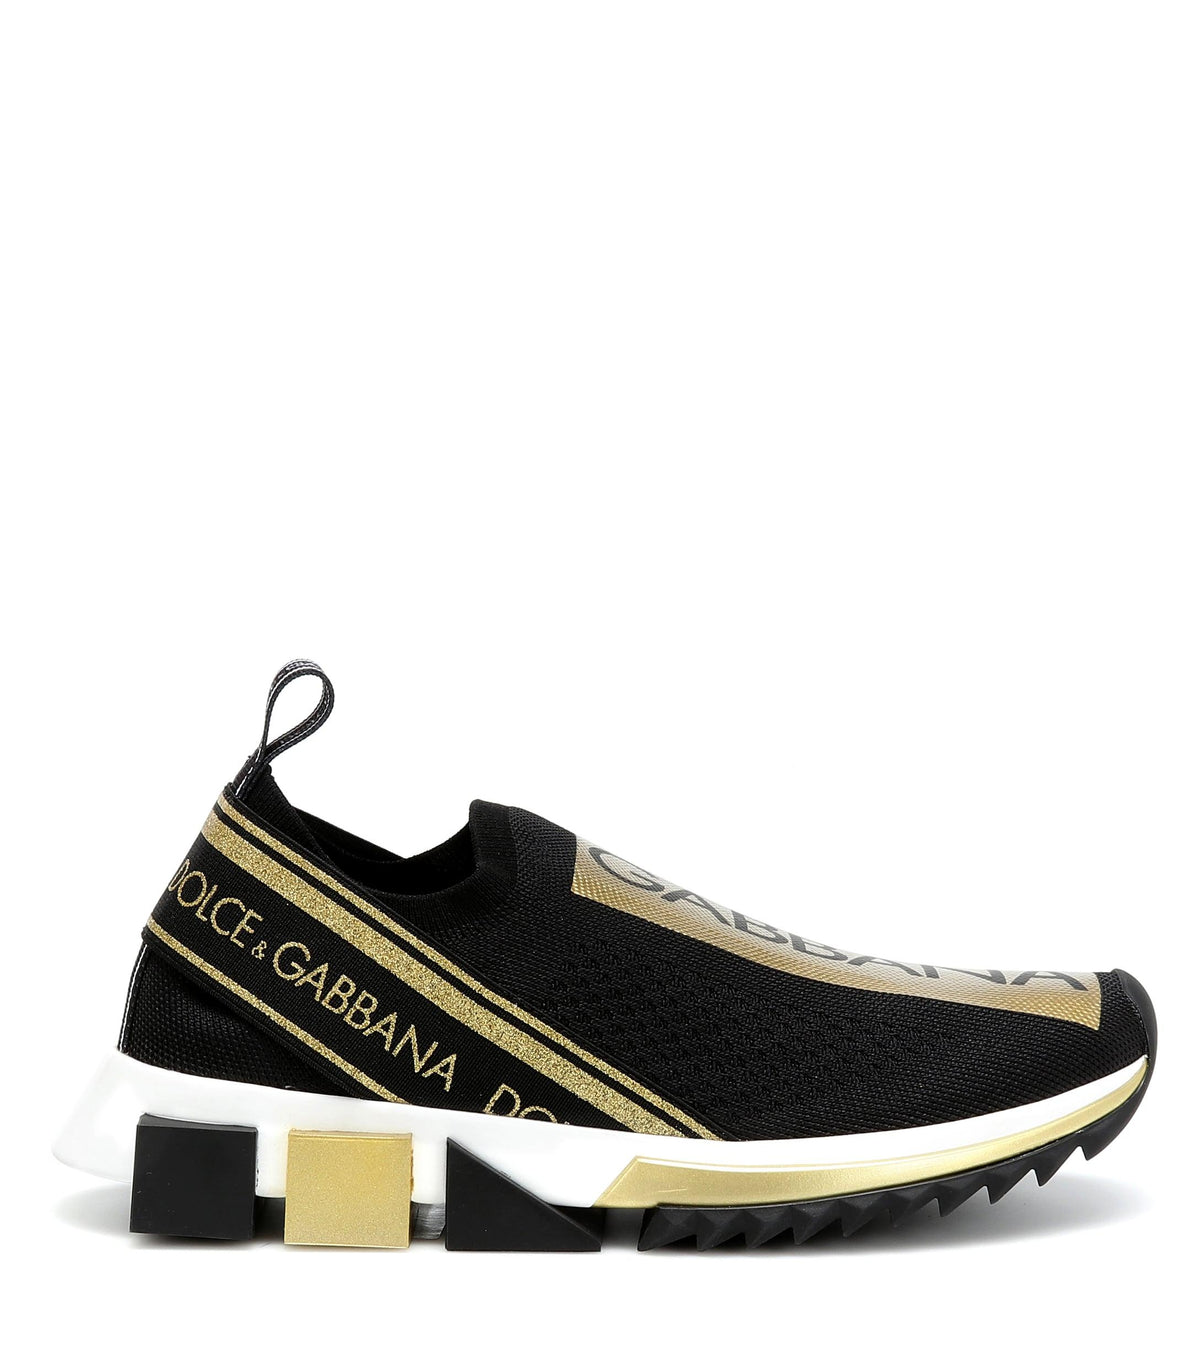 Dolce and Gabbana Sorrento Sneakers in Black and Gold — Luxurysnob